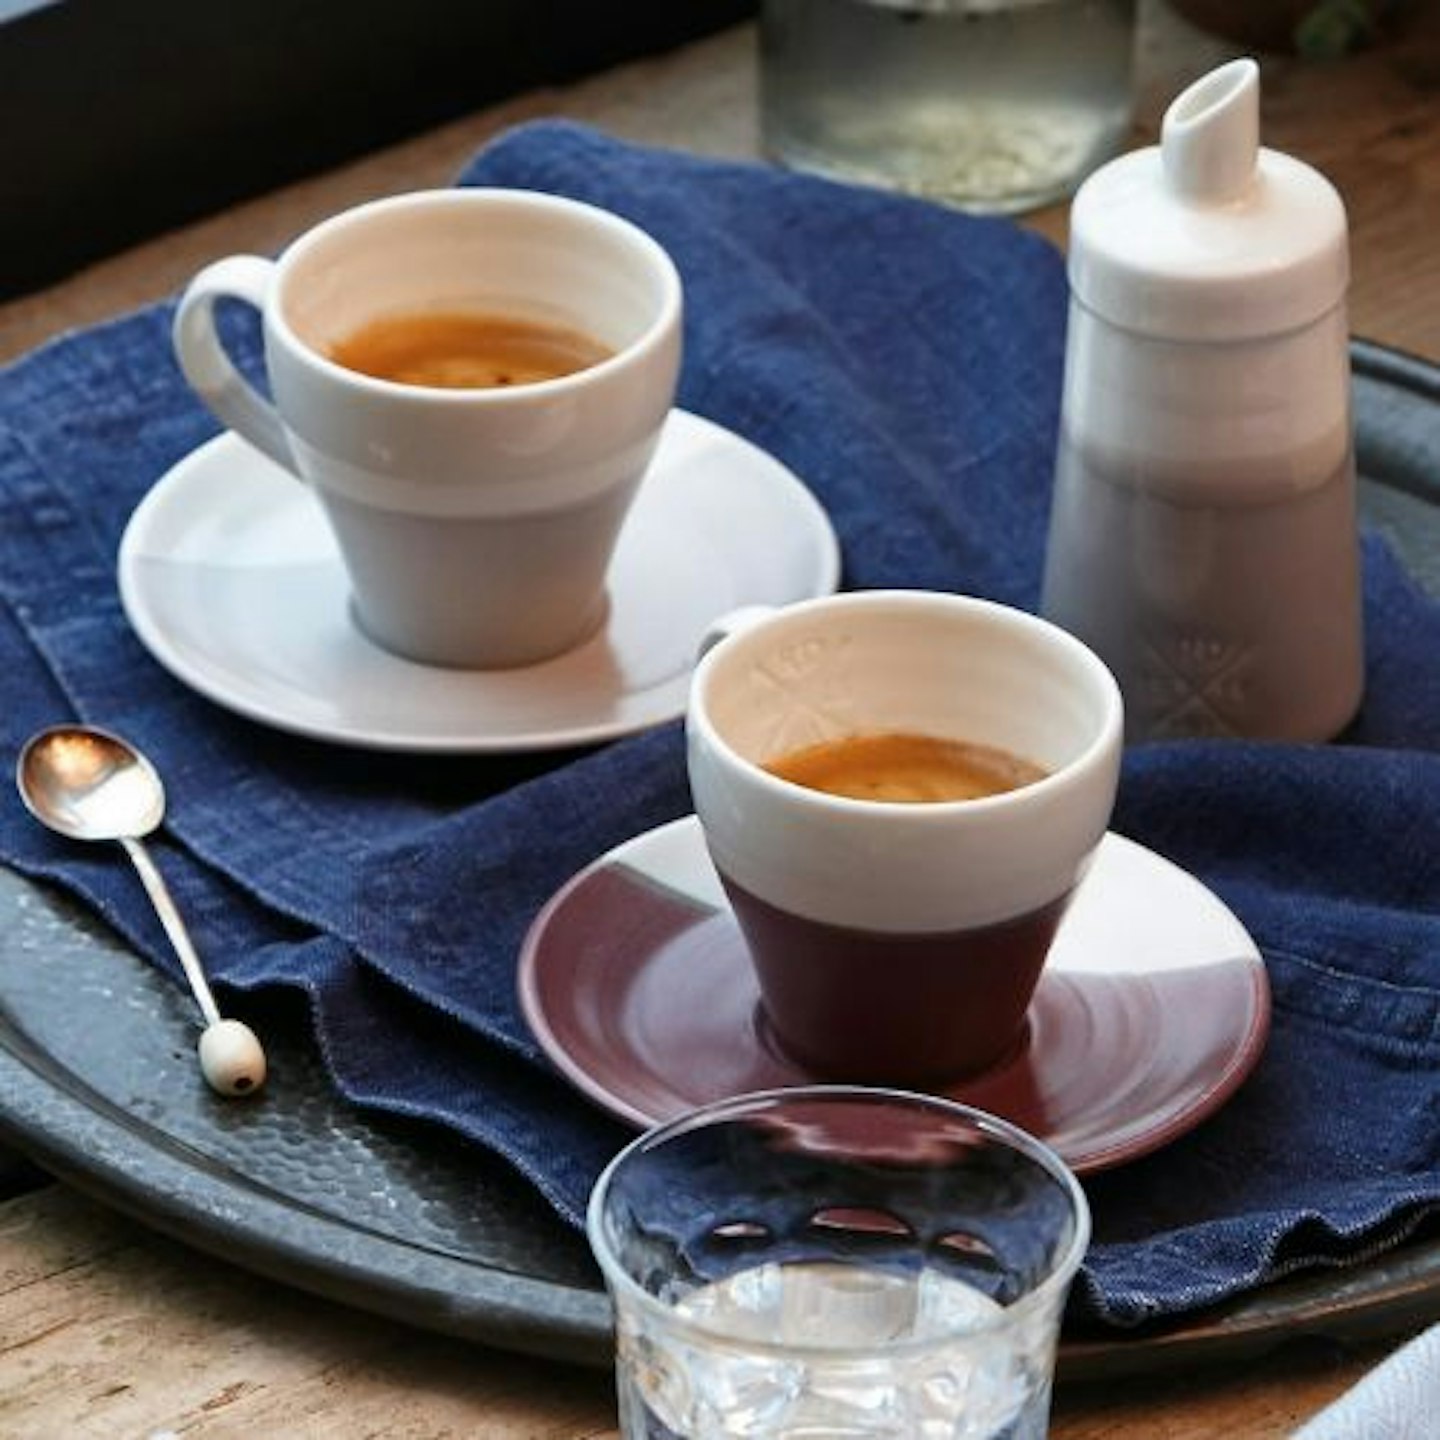 Royal Doulton Coffee Studio Espresso Cups And Saucers